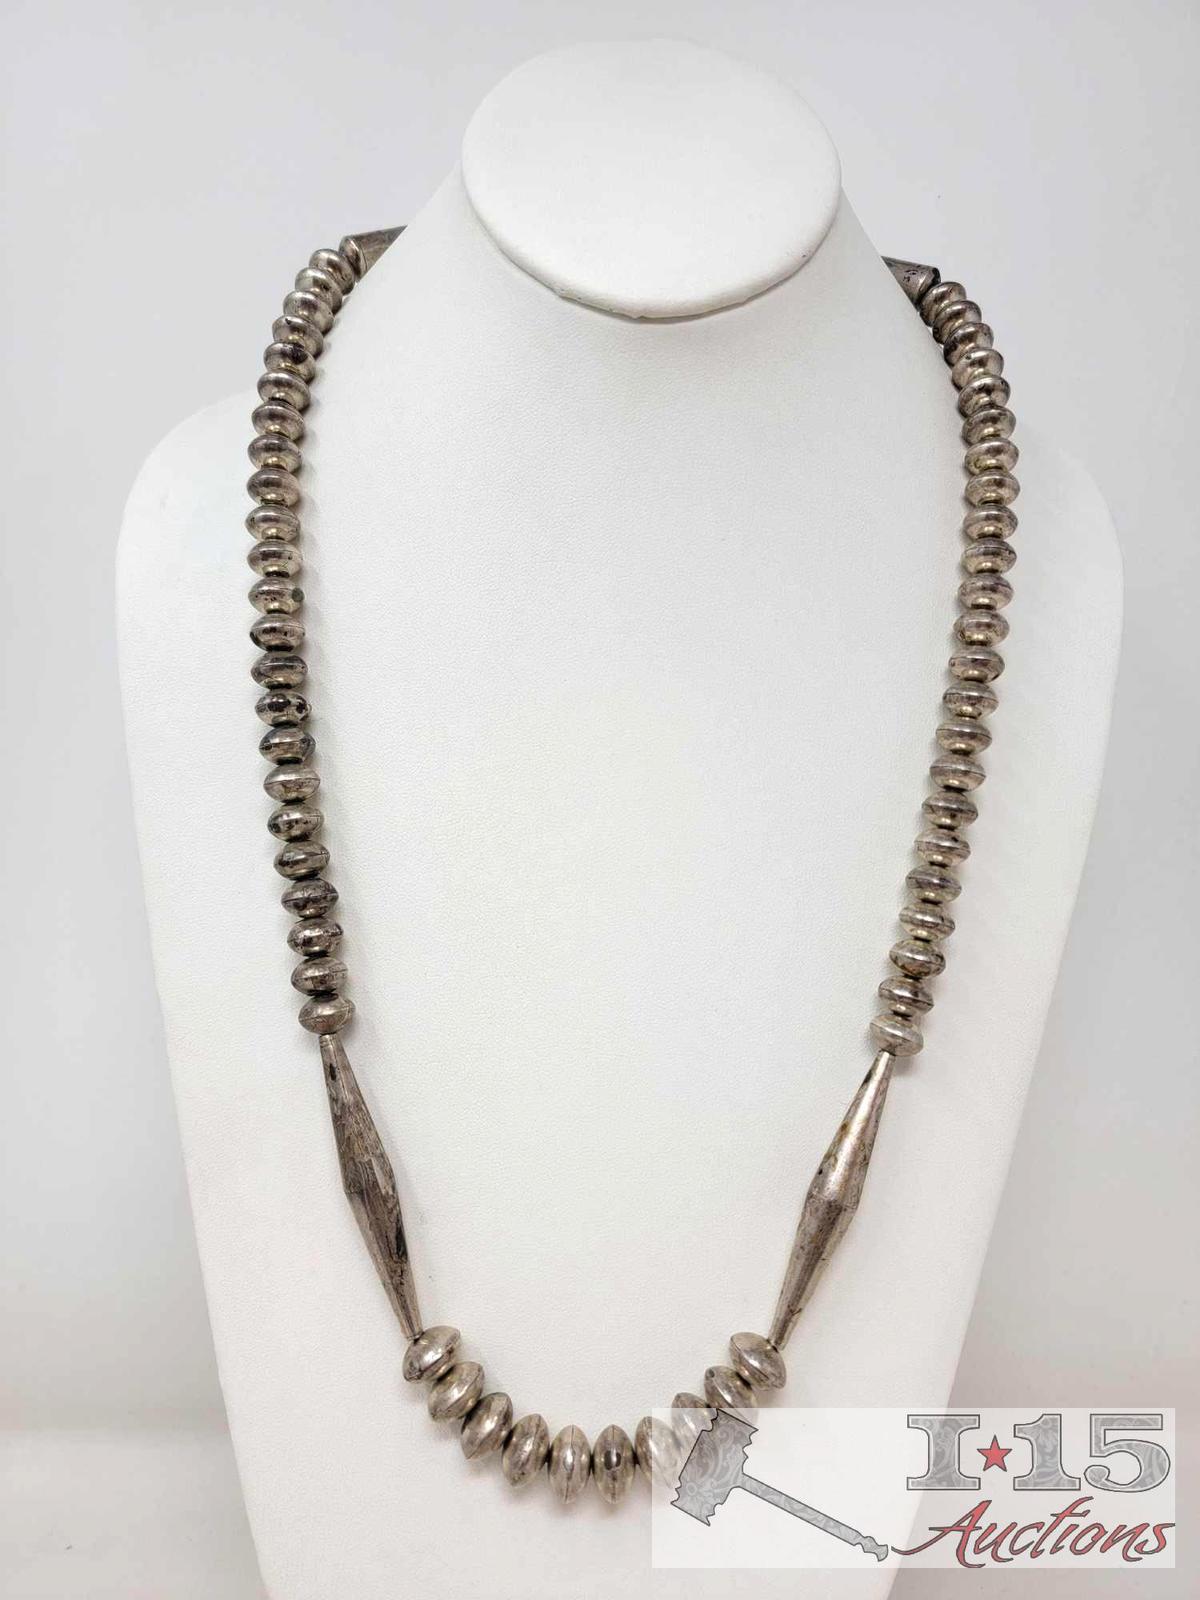 VTG RARE NAVAJO STERLING SILVER BENCH BEADS 28 INCH NECKLACE HUGE PAWN 11MM BEAd